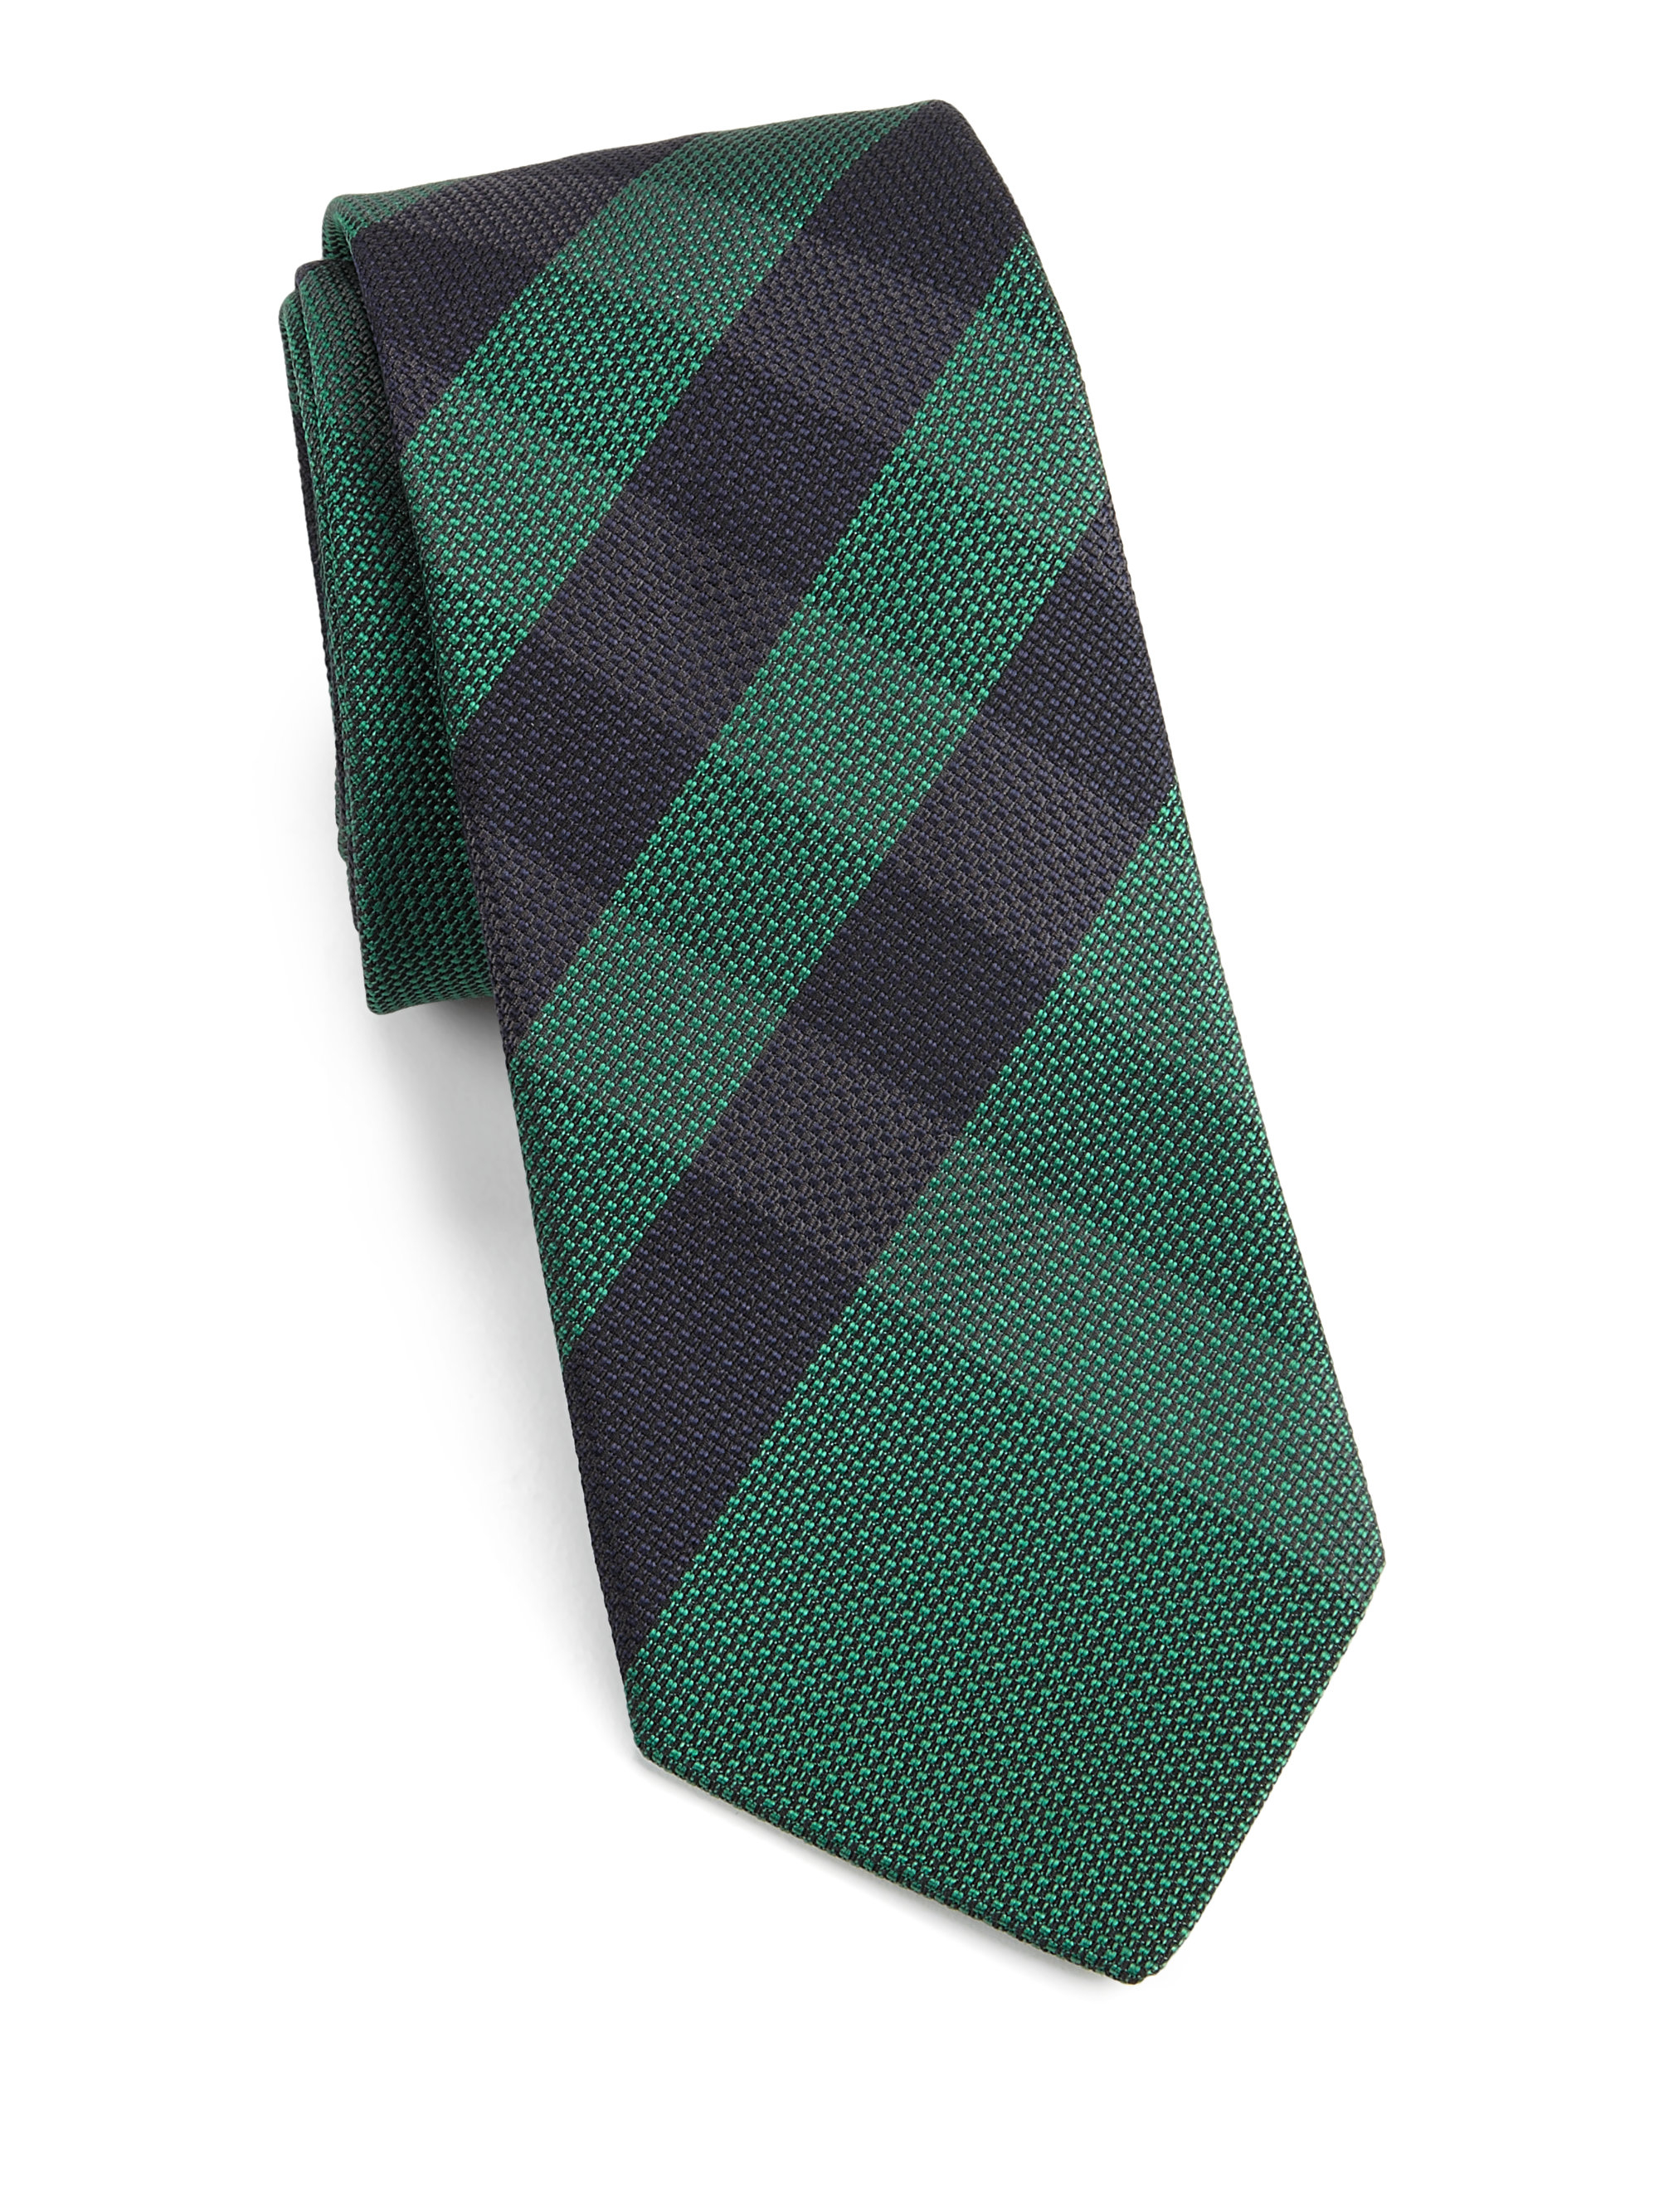 Burberry Check Textured Tie in Green-Navy (Green) for Men - Lyst